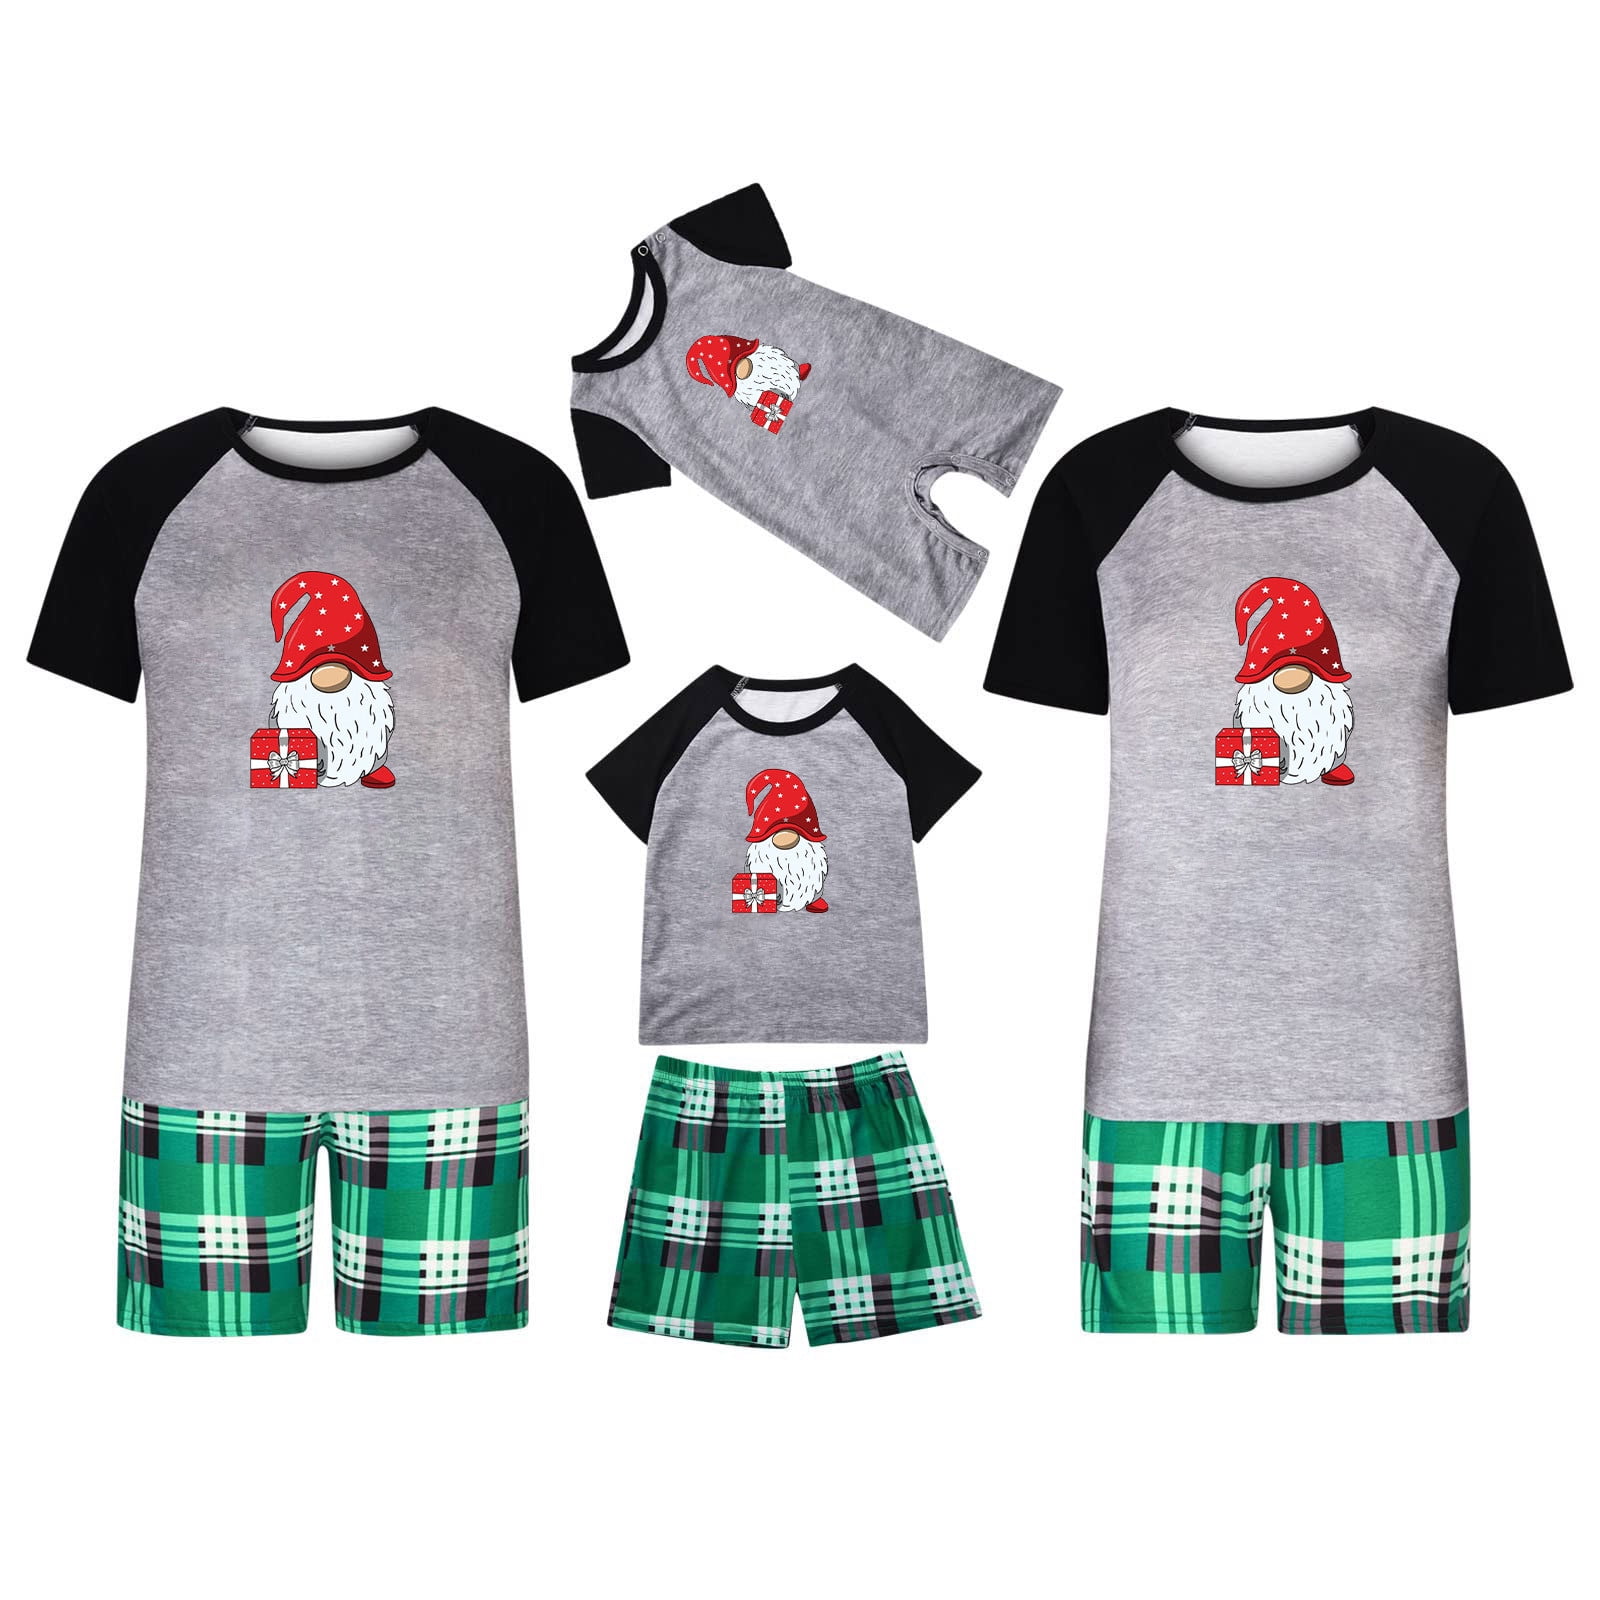 cllios Marching Christmas Pjs for Family Xmas Long Sleeve Crewneck Tops and  Plaid Pants Gnomes Christmas Pjs Sleepwear Holiday Nightwear Jammies Sets  Dad M 